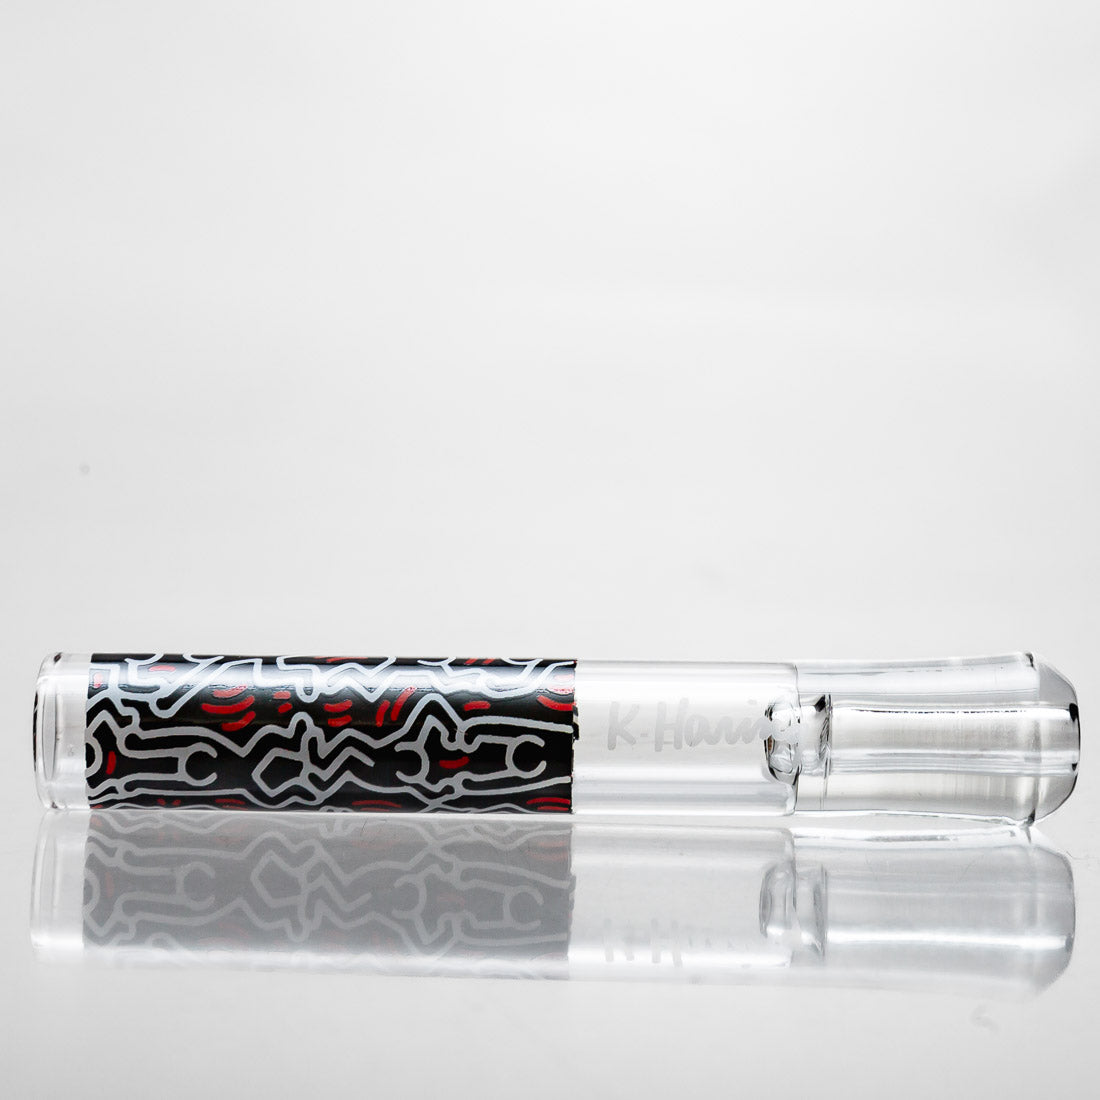 Keith Haring Glass Taster Chillum Onie Pipes